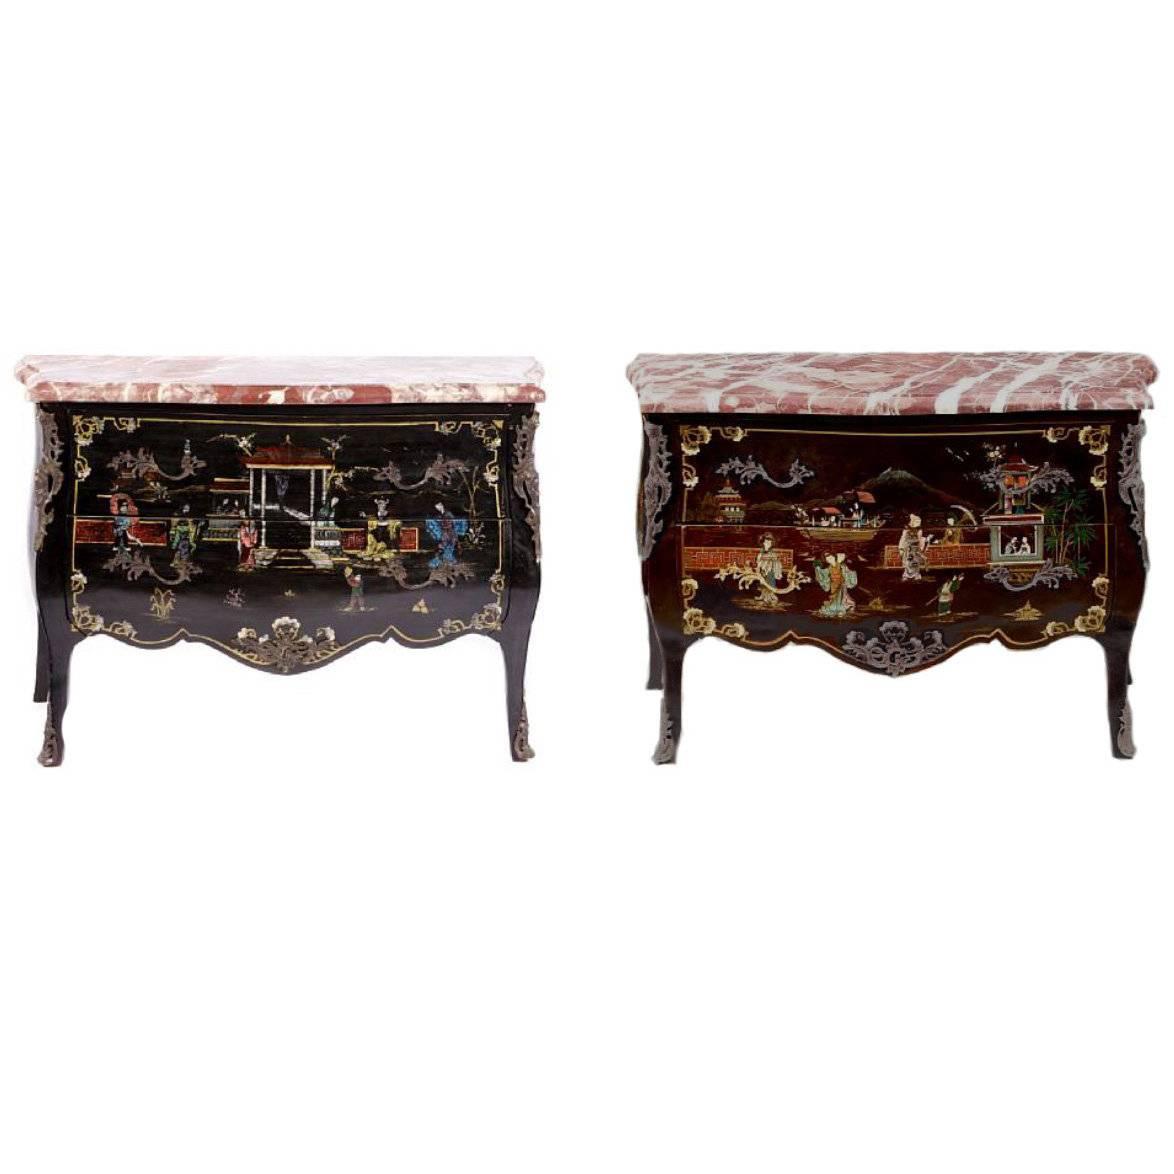 Pair of Louis XV Style Chinoiserie Marble-Topped Commodes